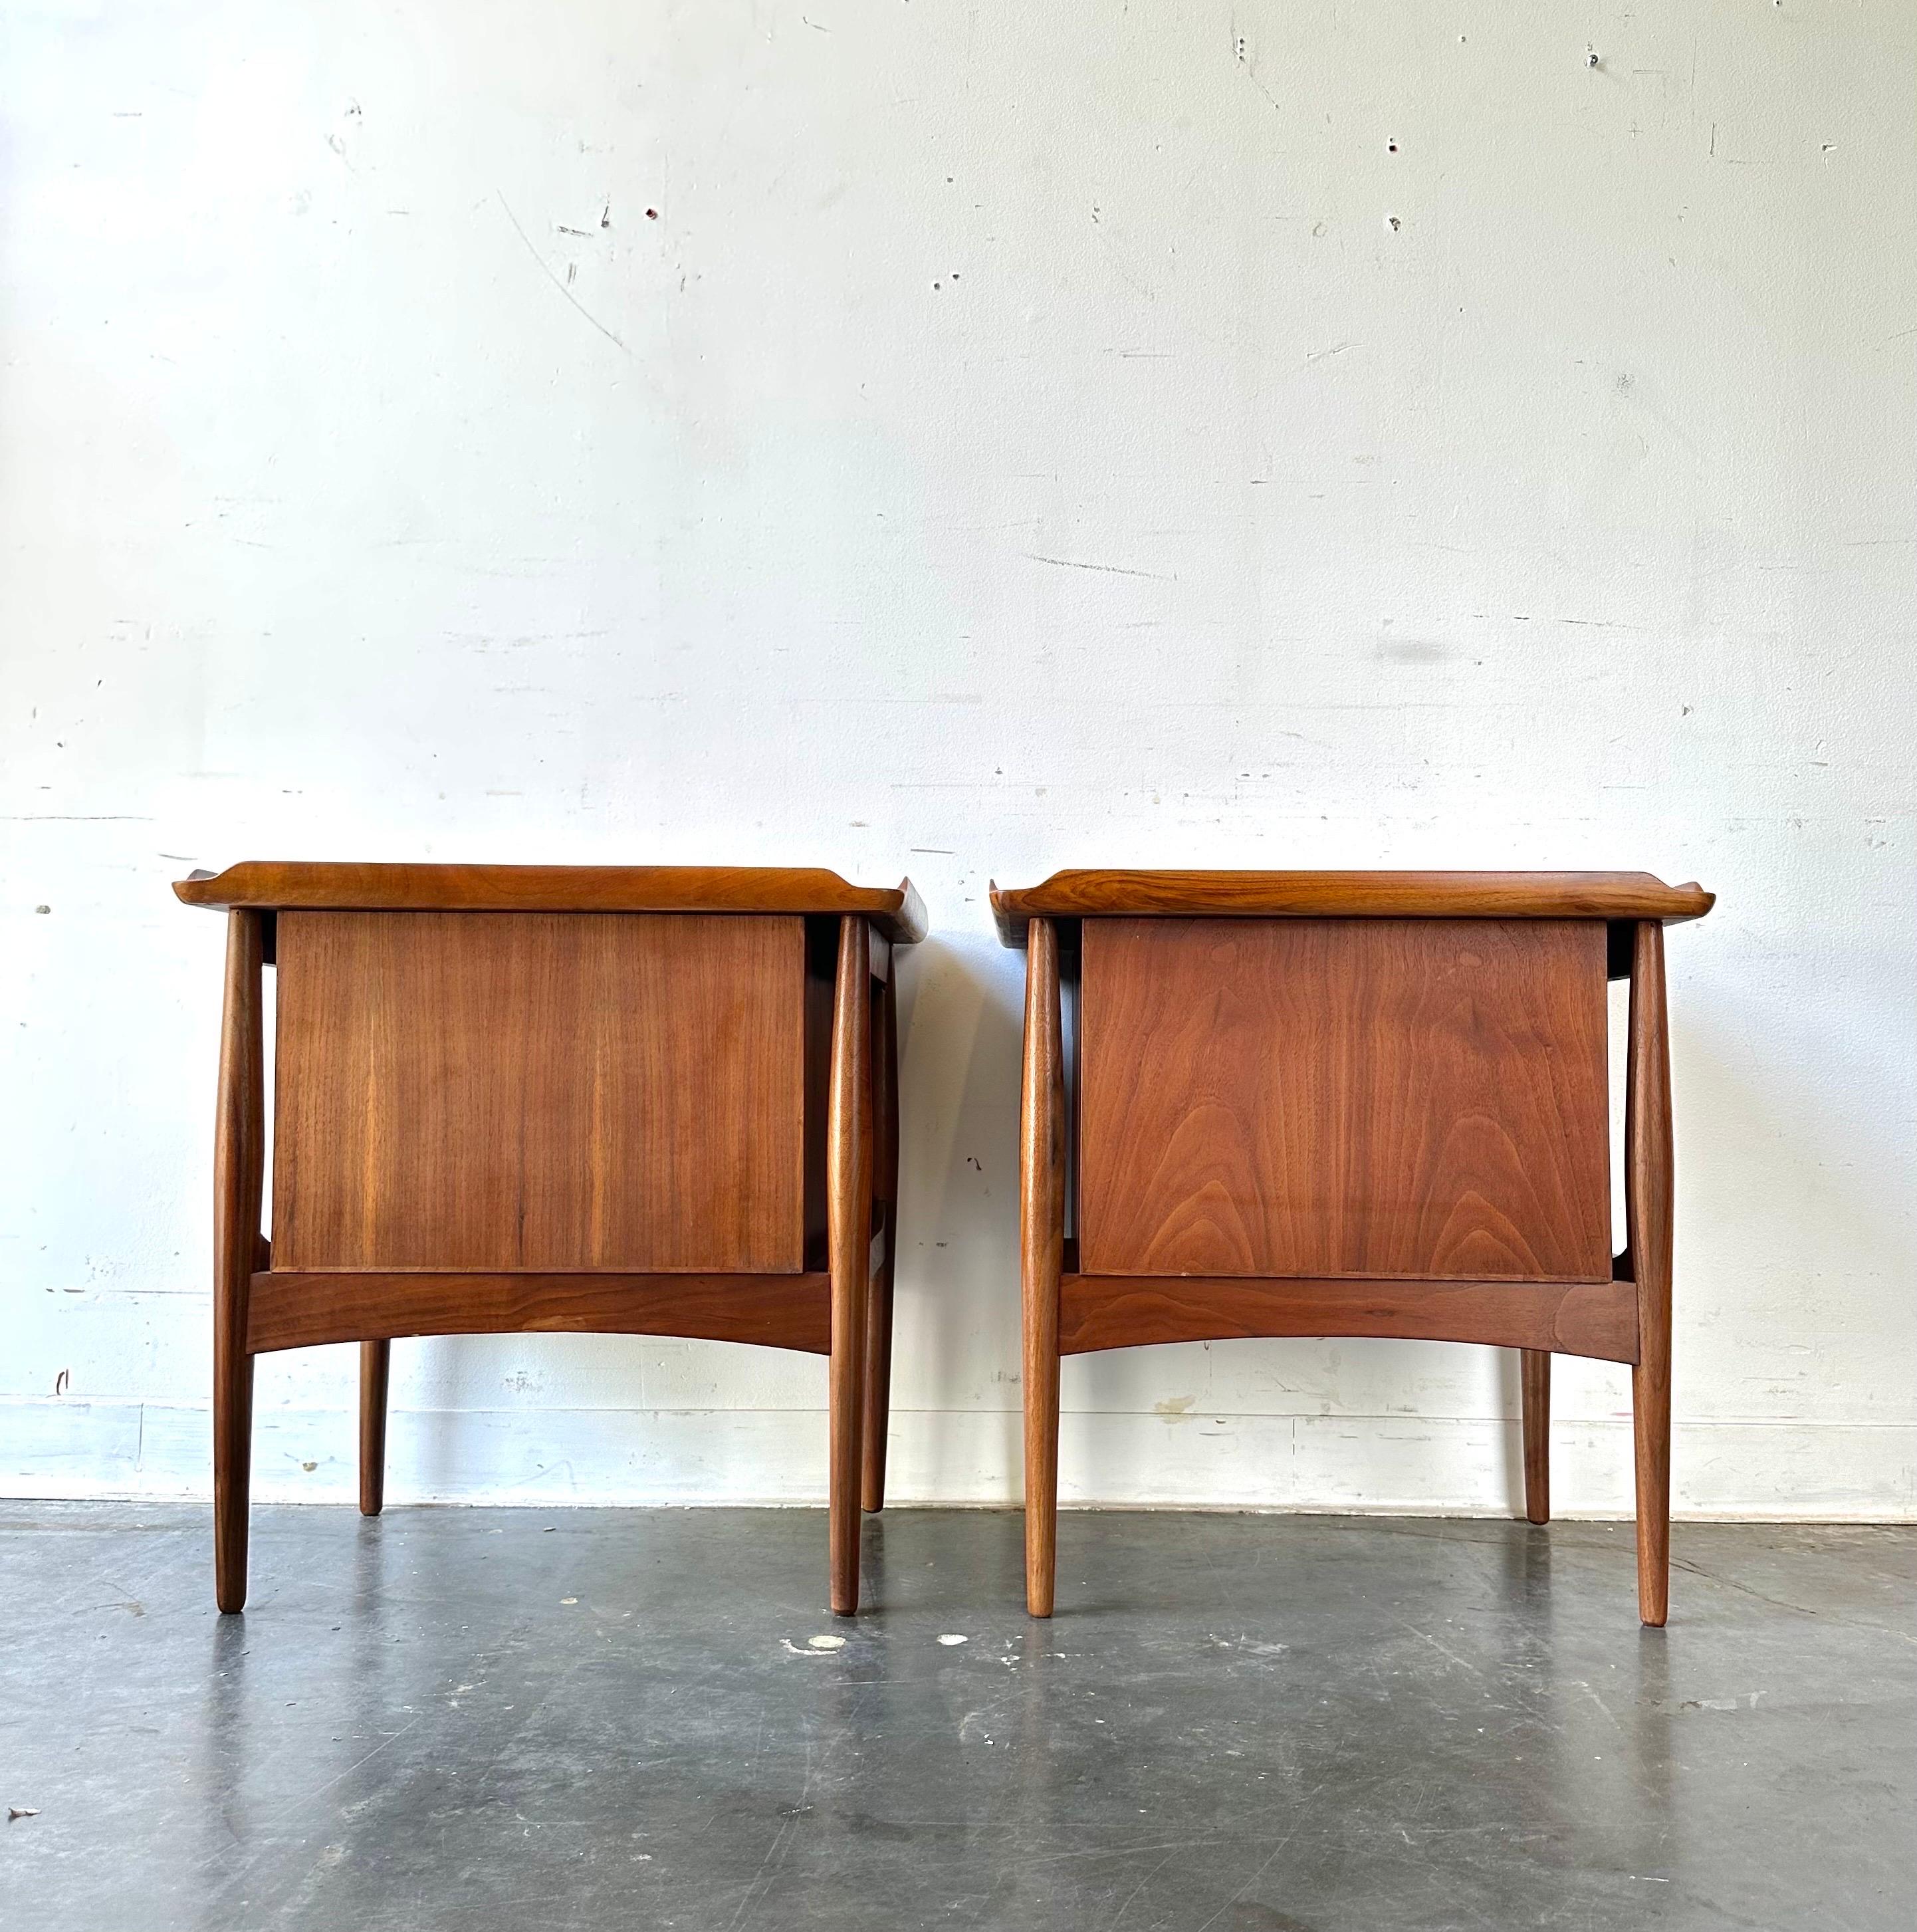 Danish sculptural base end tables or nightstands.

Phenomenal set in excellent condition. ( recently restored) Featuring a single drawer and open shelf in each, these can sit in the middle of a room as the backs are fully finished with outstanding